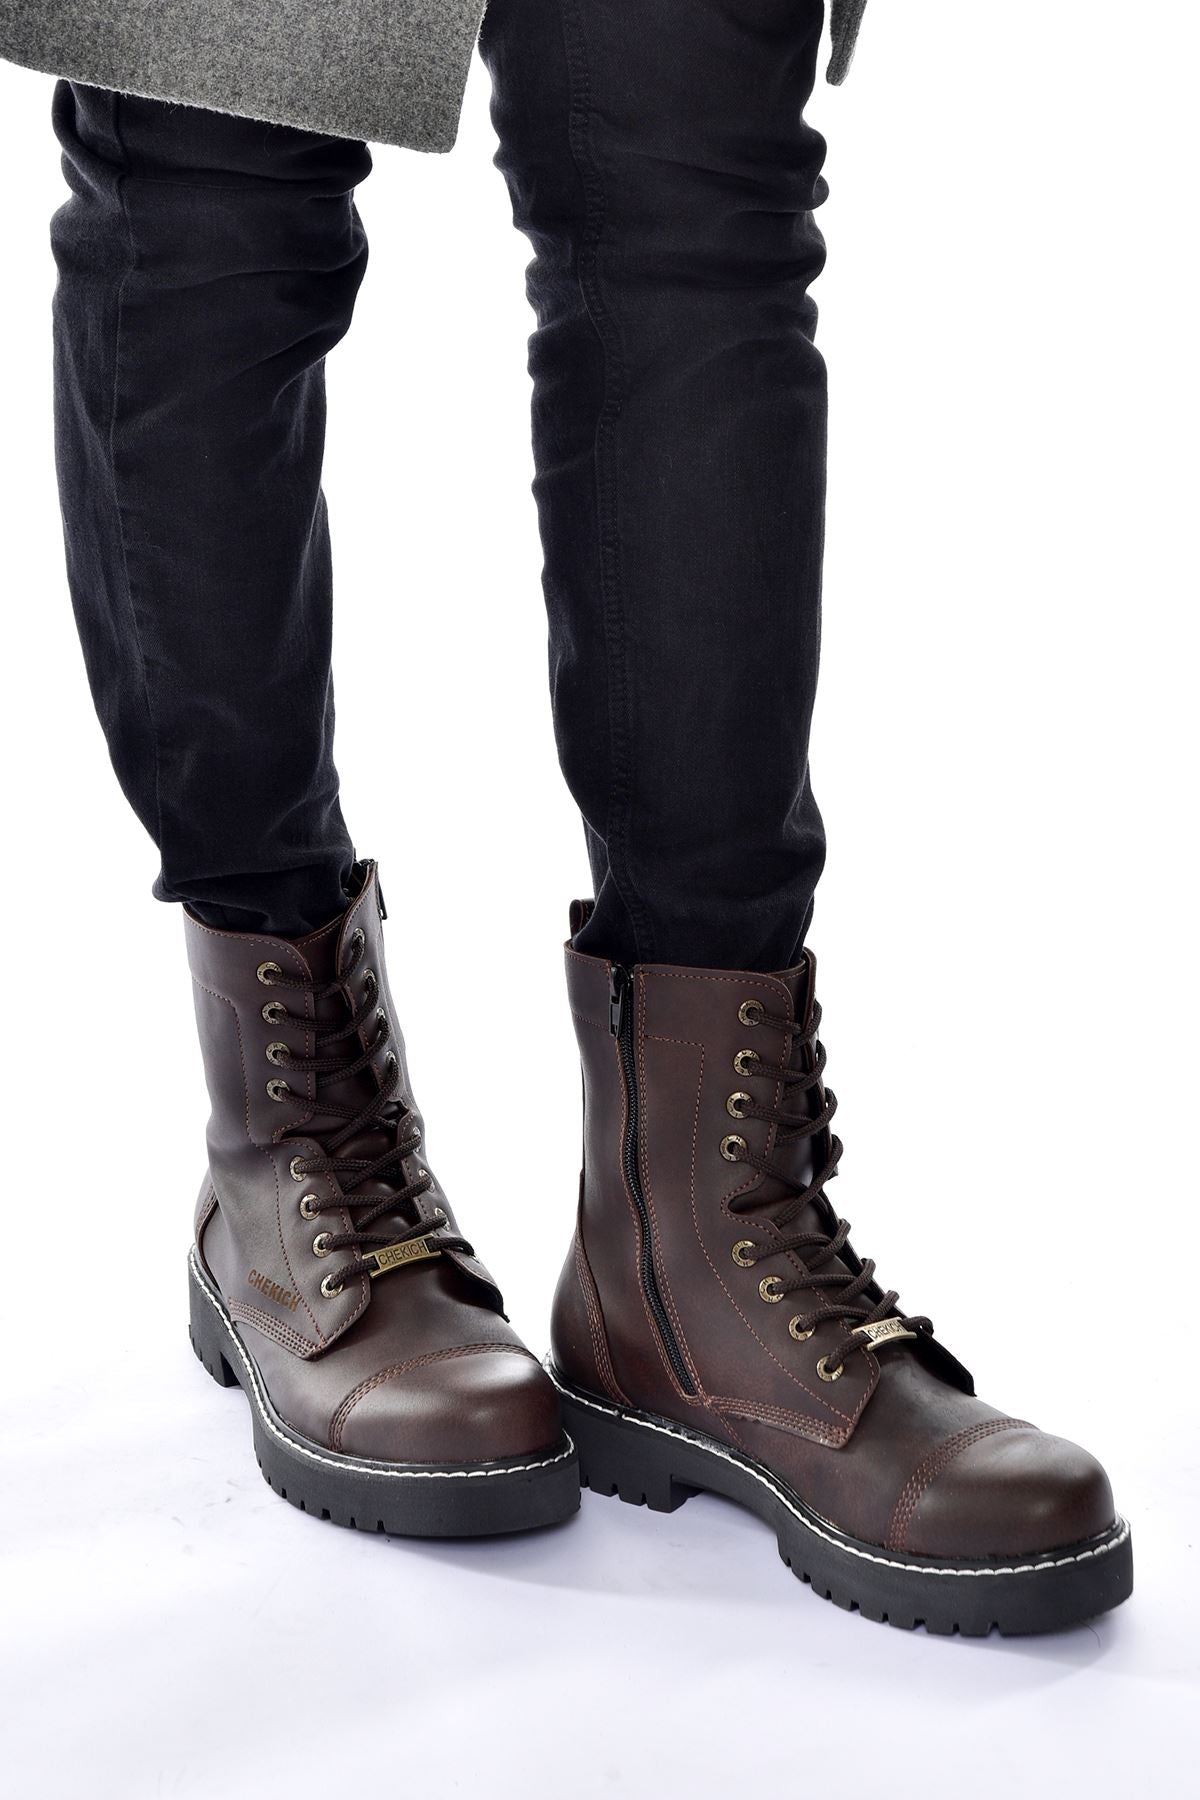 CH009 Men's Leather Dark Brown-Black Sole Casual Winter Boots - STREETMODE ™